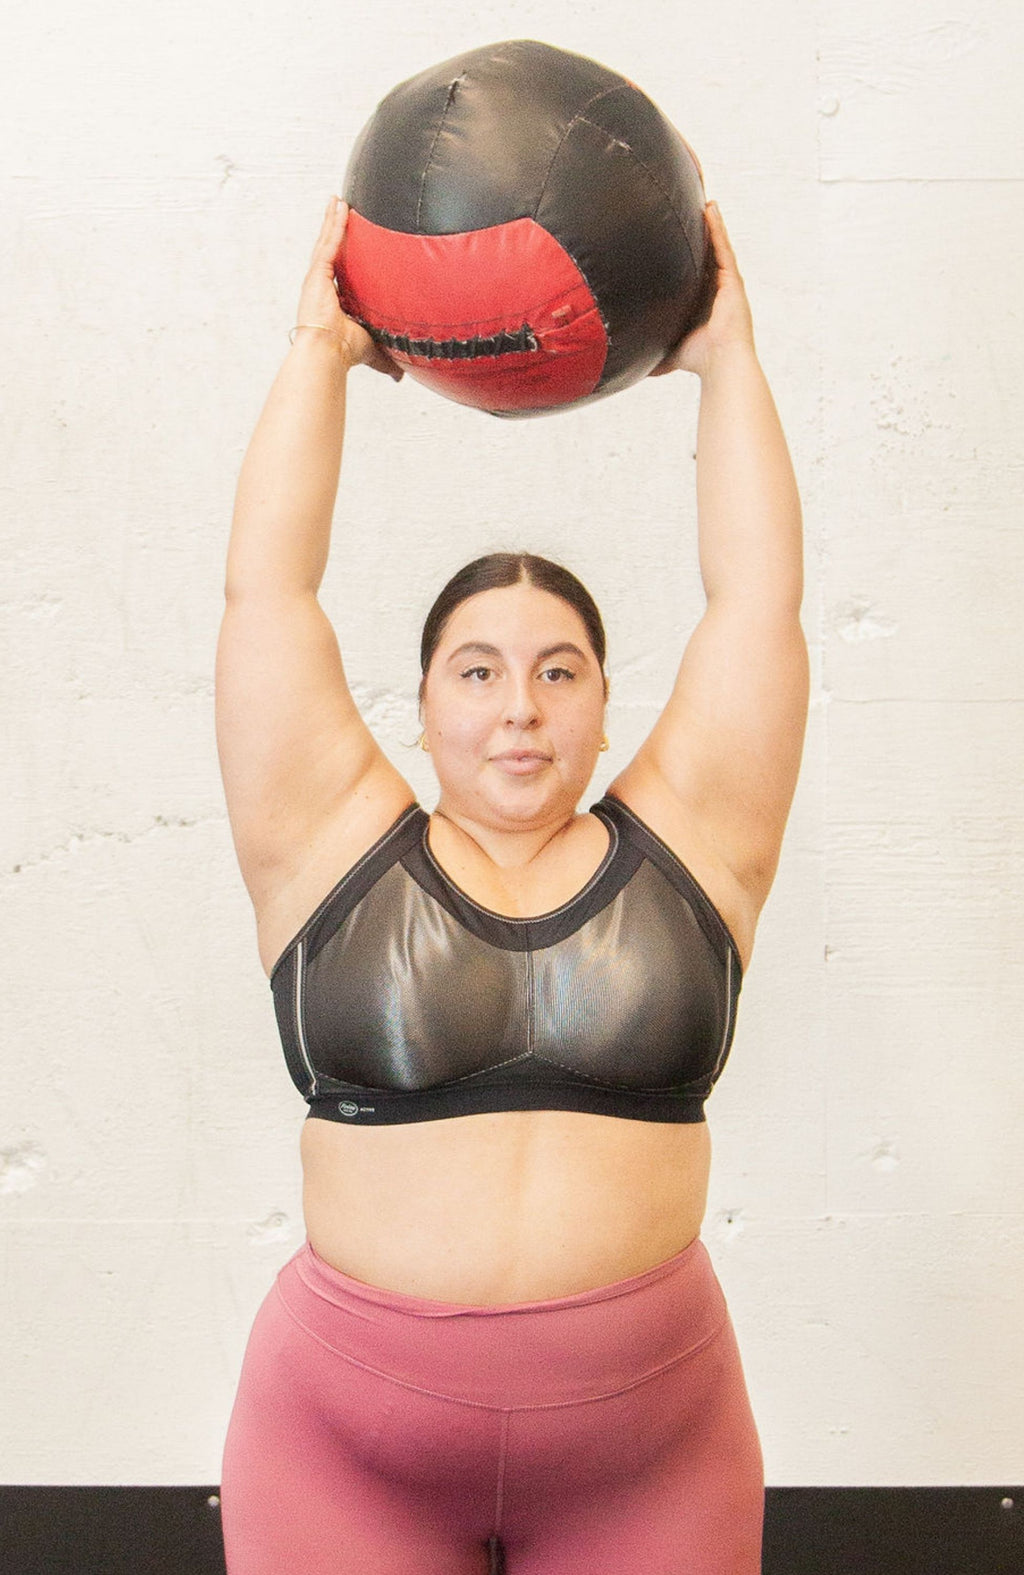 Shop Anita Active High Impact Sports Bras from Sweat Society